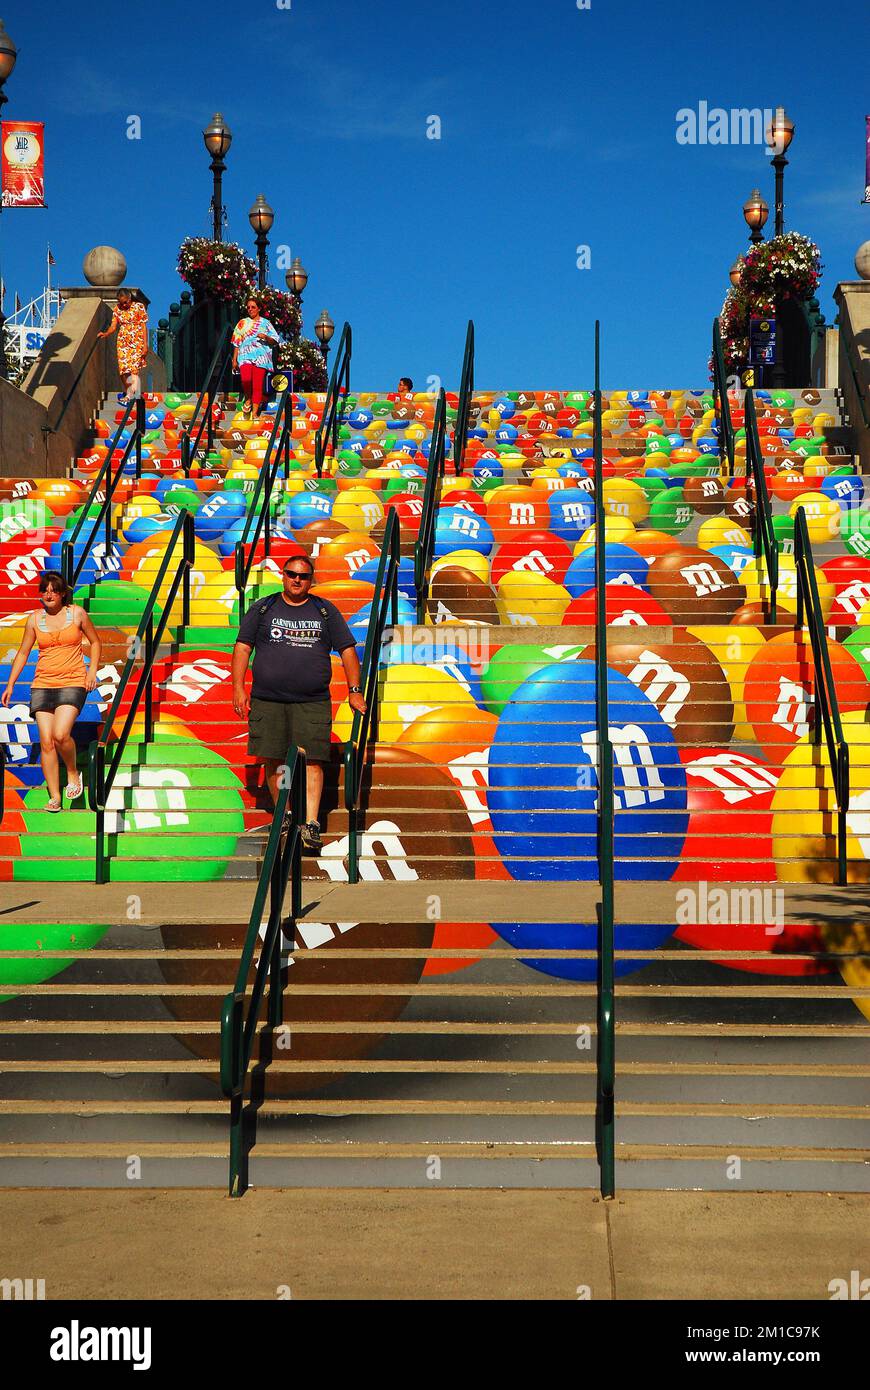 The stairs leading to an amusement park also double as a large advertisement billboard for a popular candy candy Stock Photo